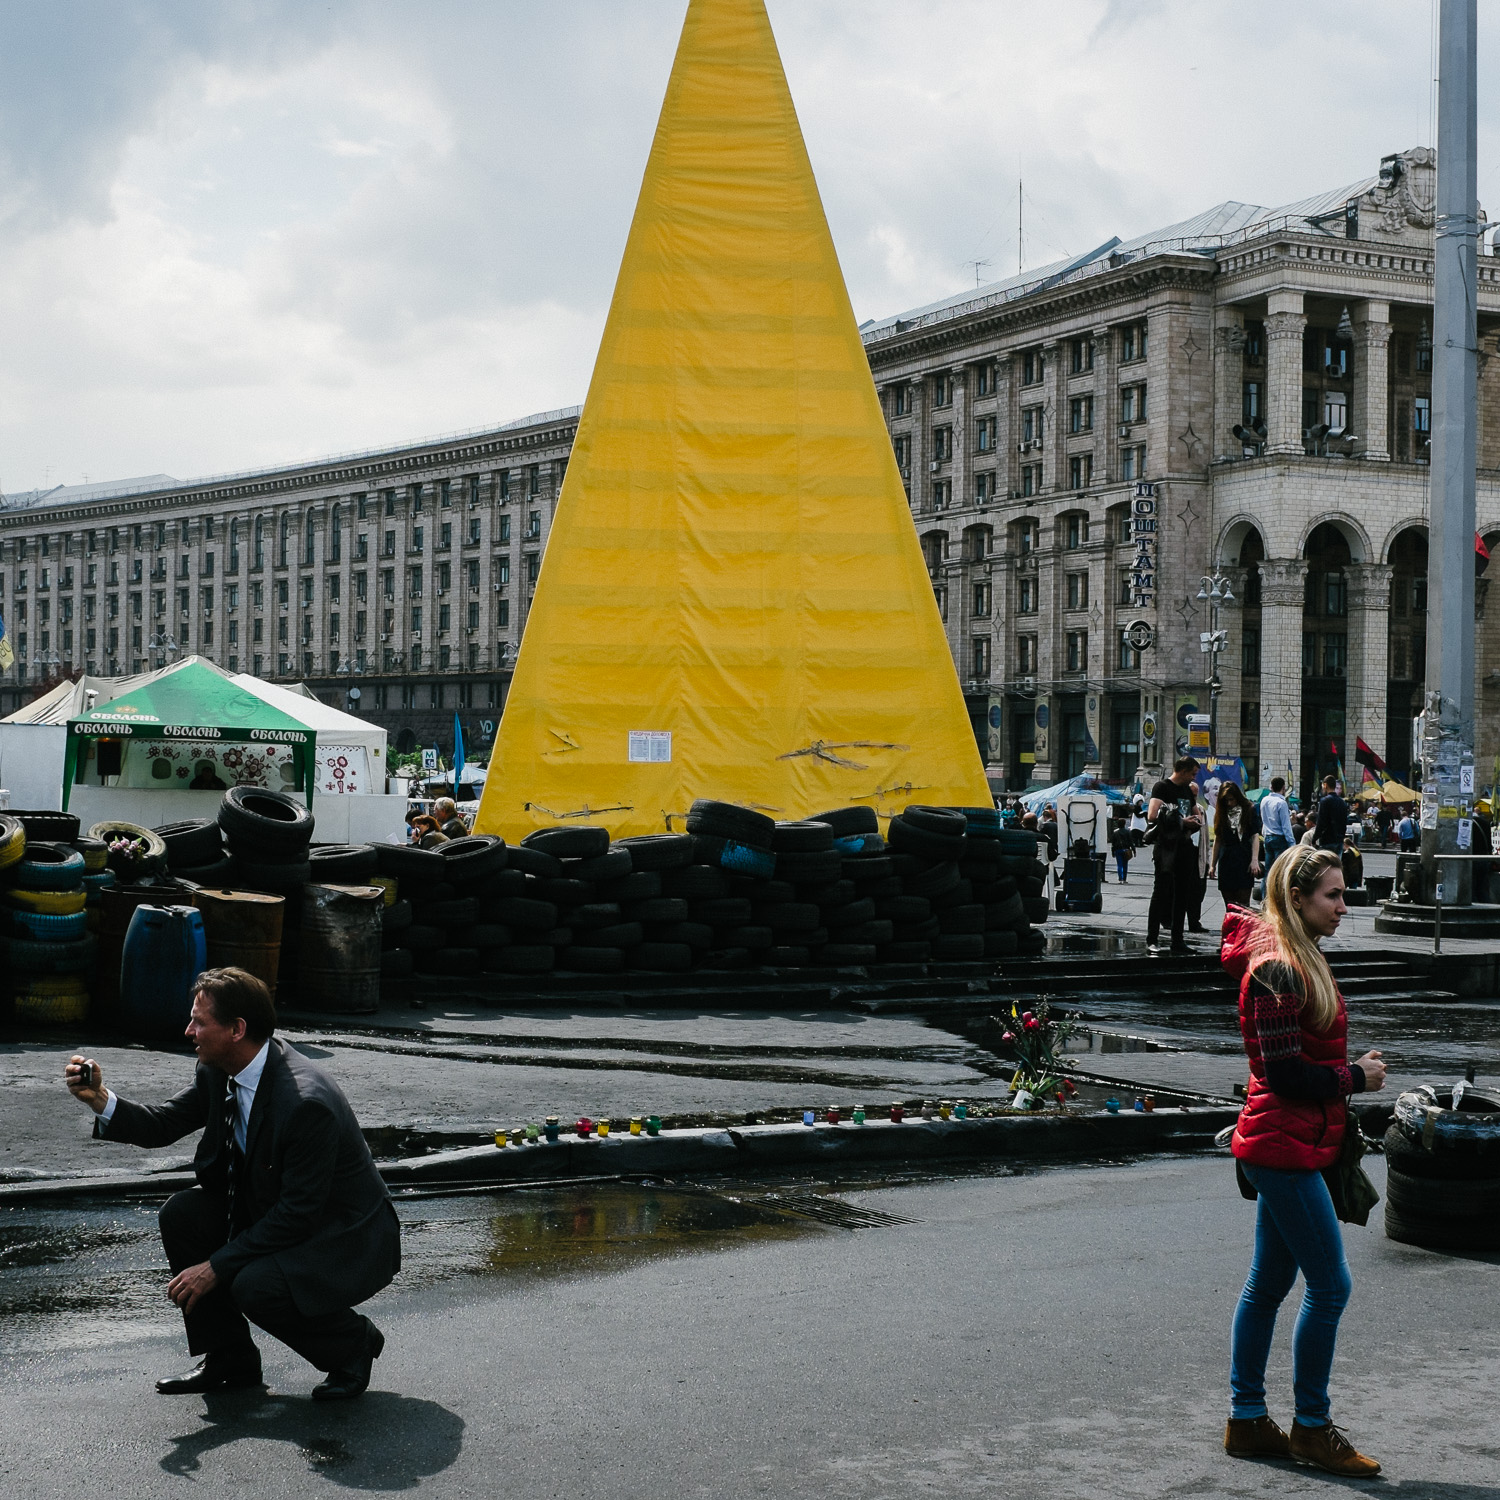  A street scene in Kyiv's Independence Square, April 2014. 